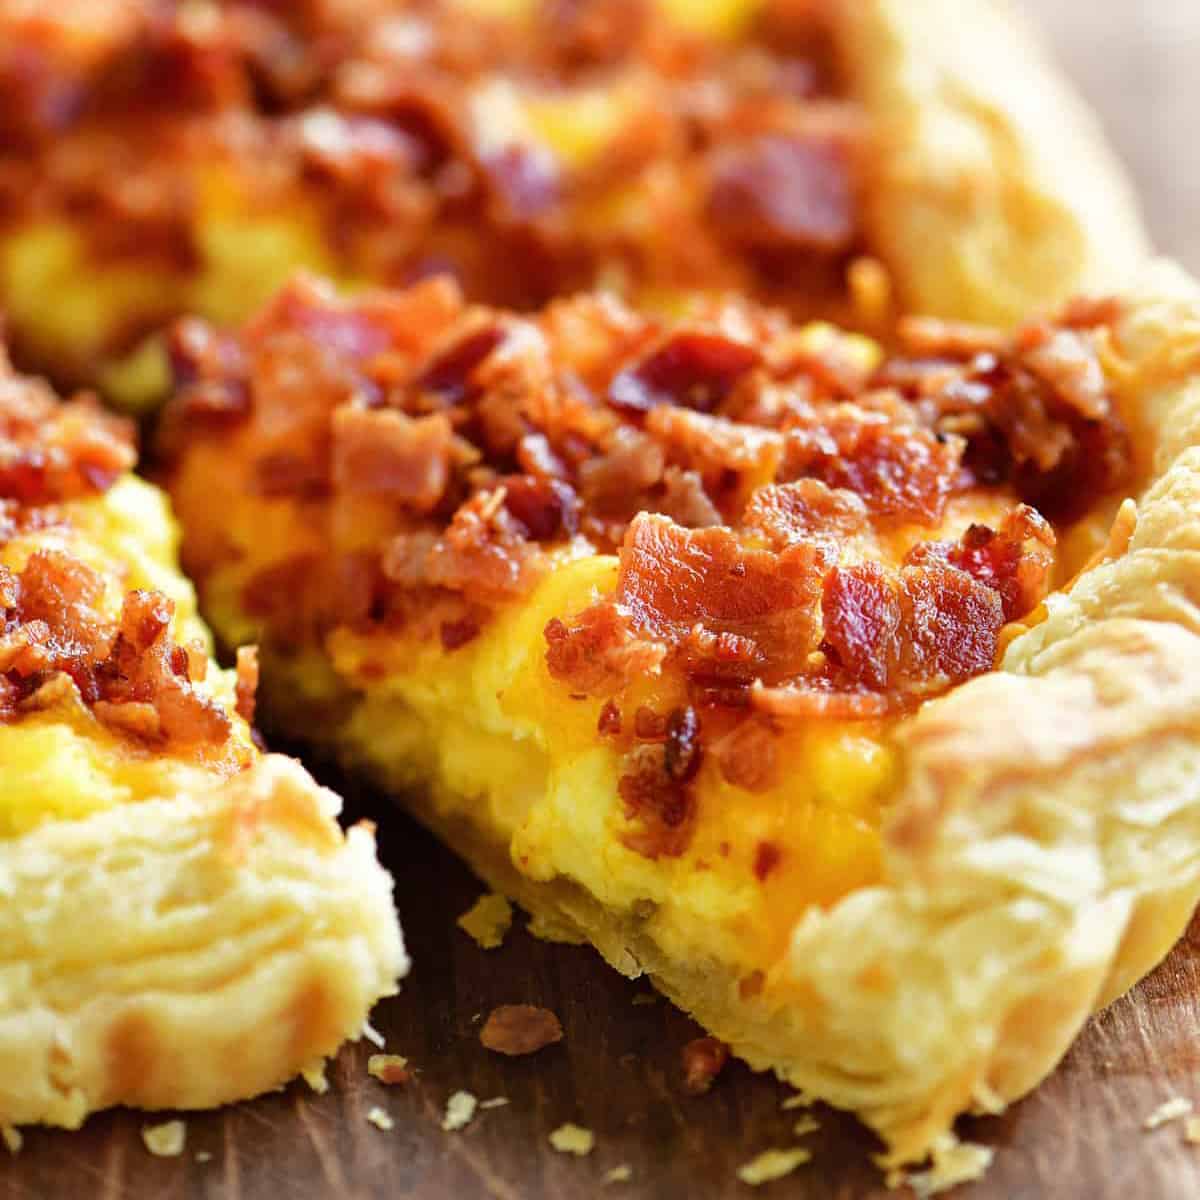 a slice of breakfast pizza with a puff pastry crust.